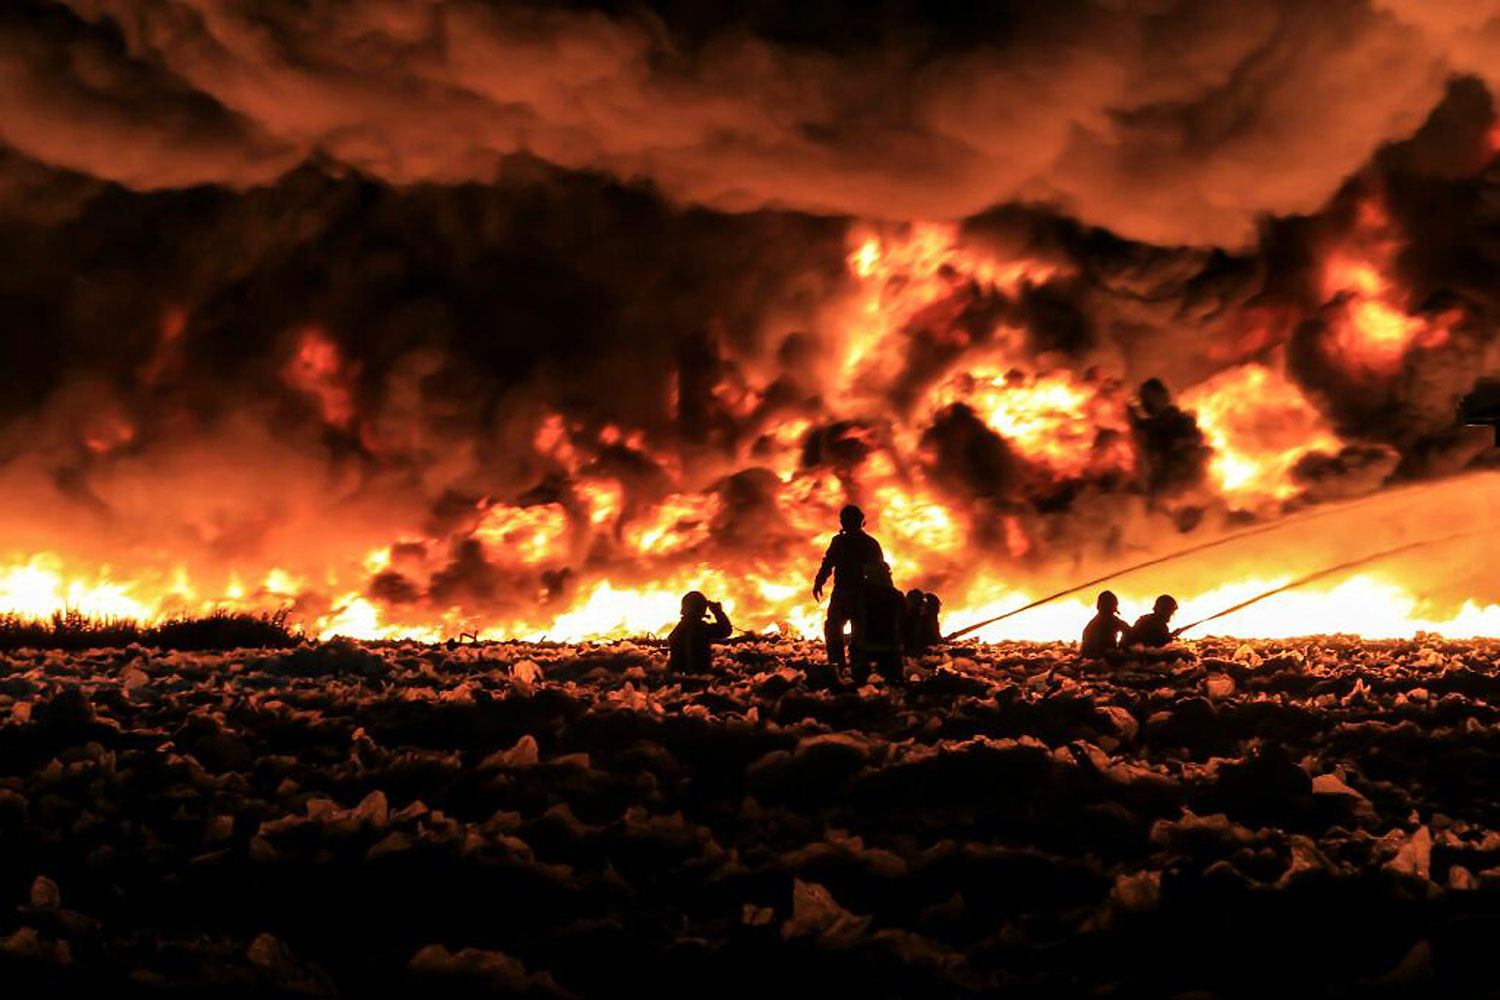 Fire fighters tackle a large blaze at a recycling center in Smethwick, near Birmingham, central England.